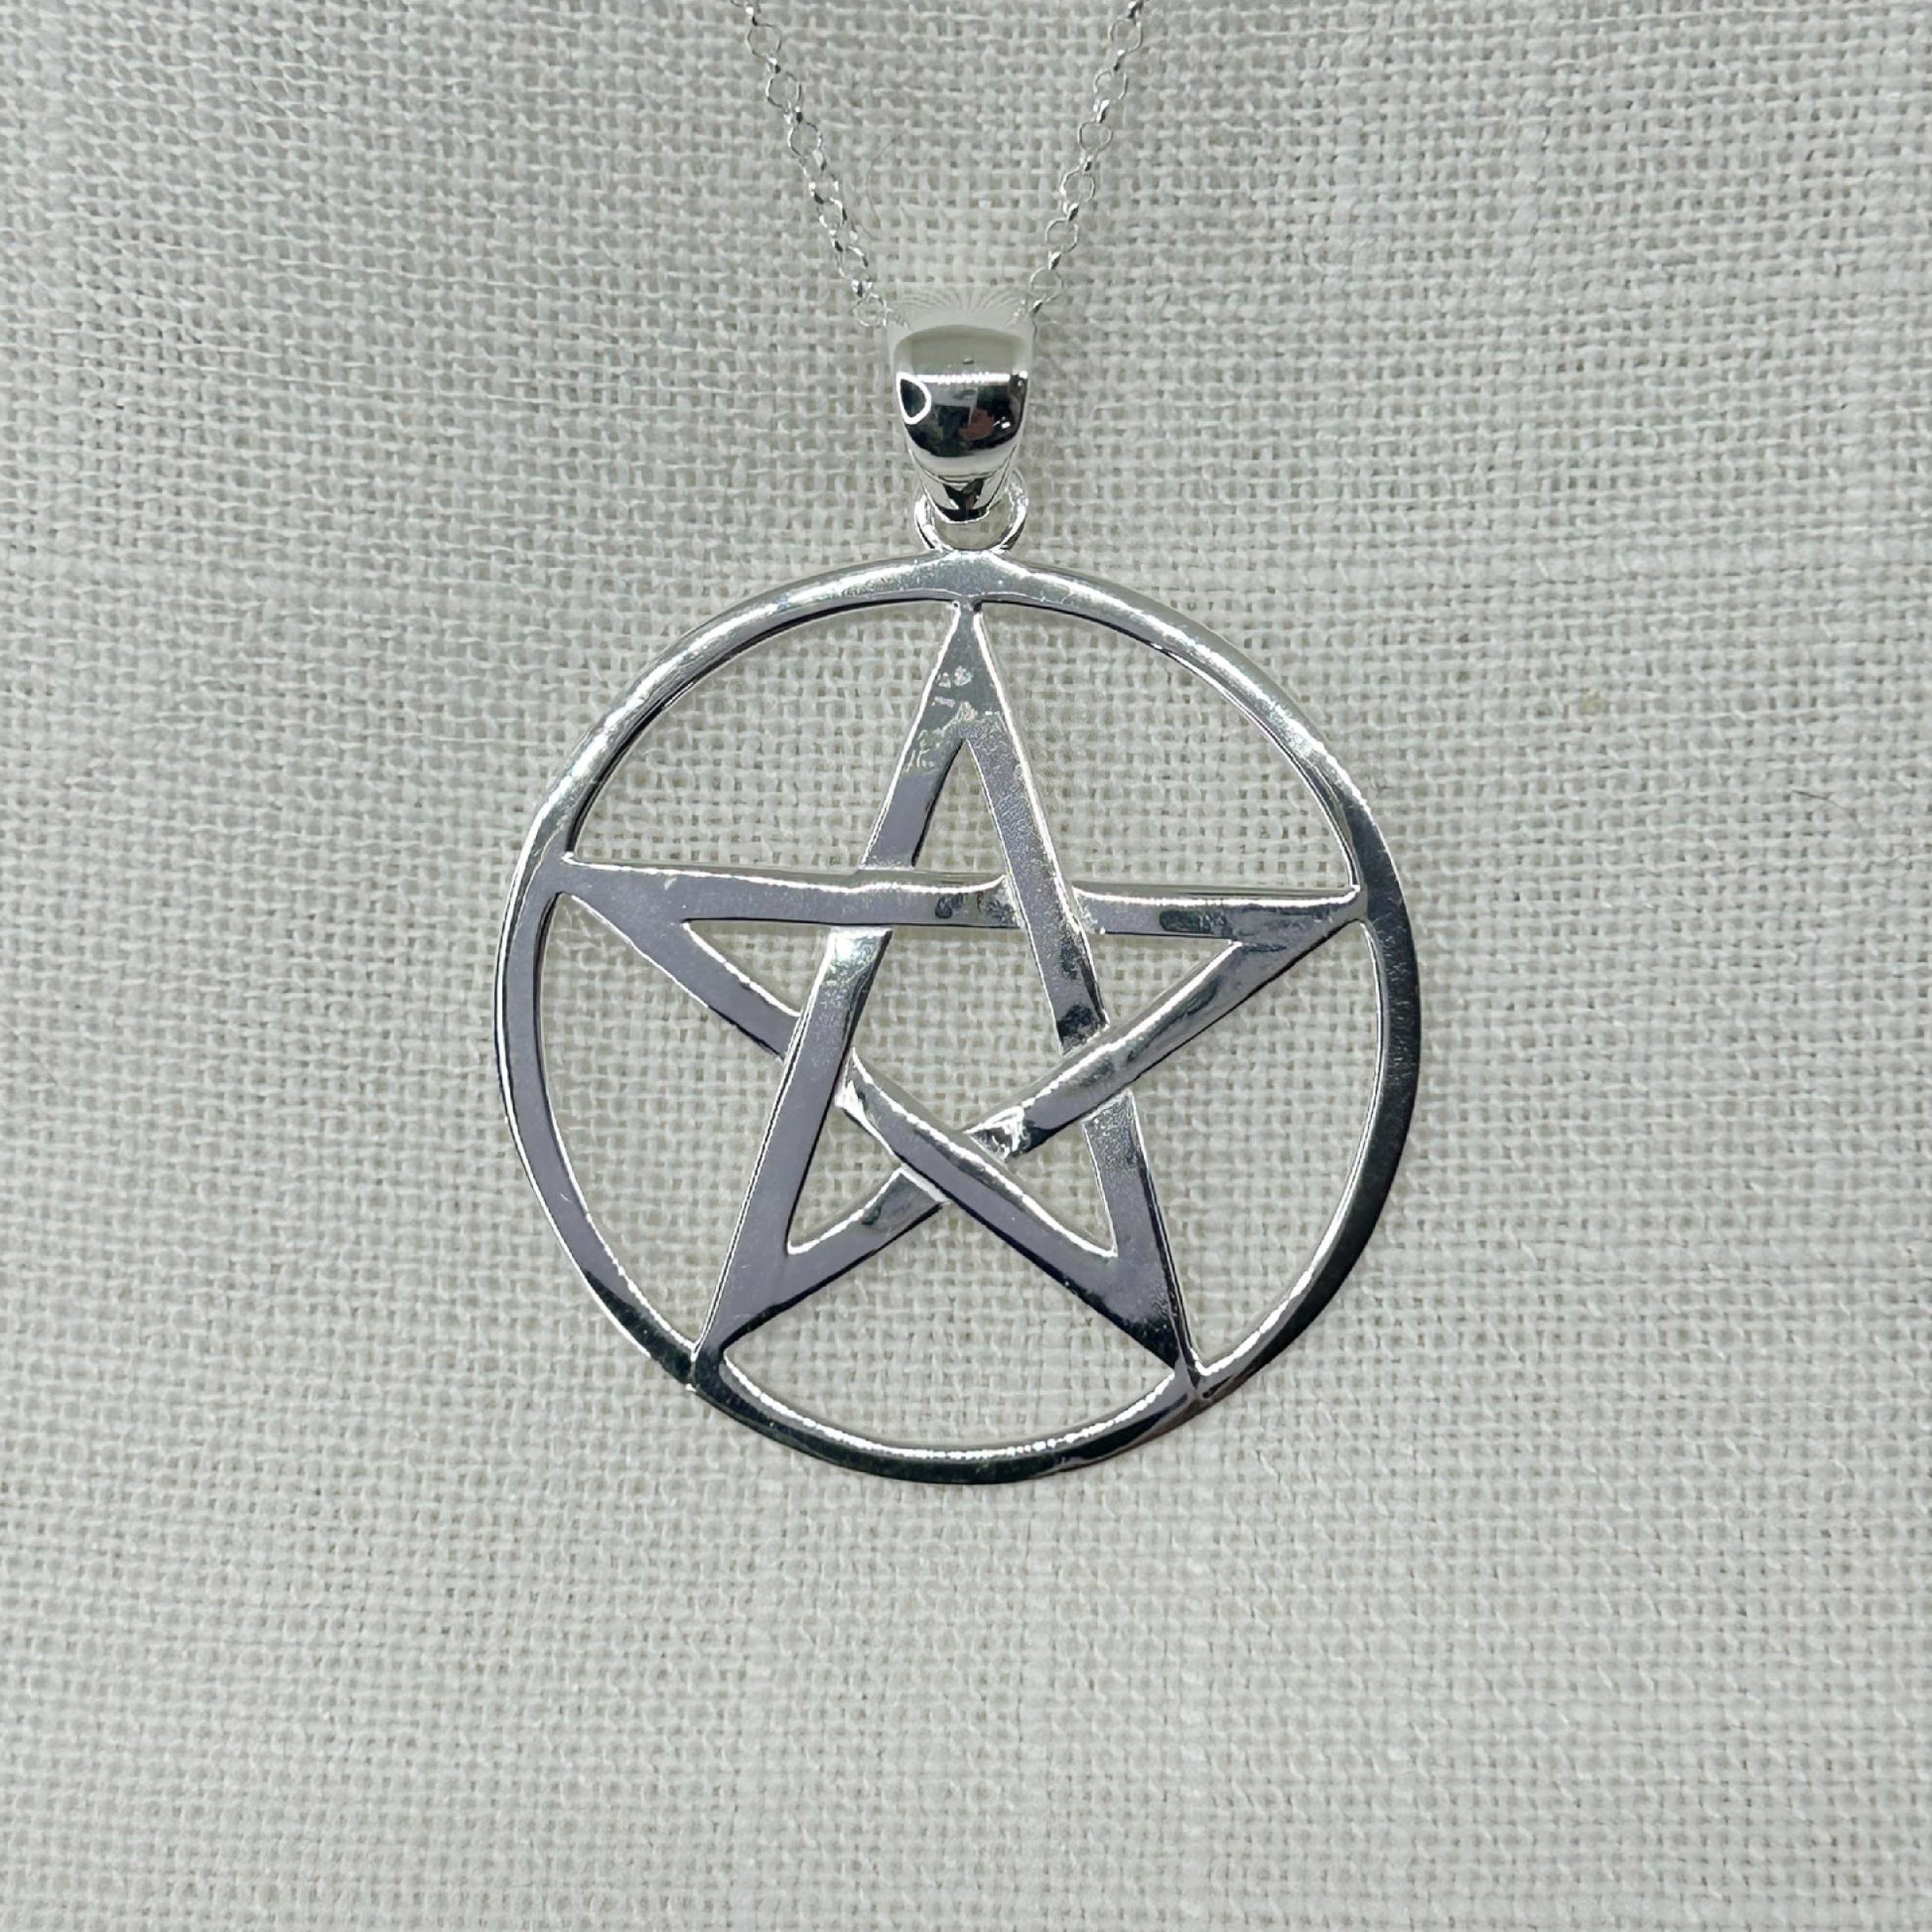 This X Large Silver Pentacle necklace is a nice heavy weight pendant. It has a high polish so looks amazing. Approx 4.5cm including the Bale. Comes supplied on 20" sterling silver cable chain arrives in a tarnish proof bag and gift box.